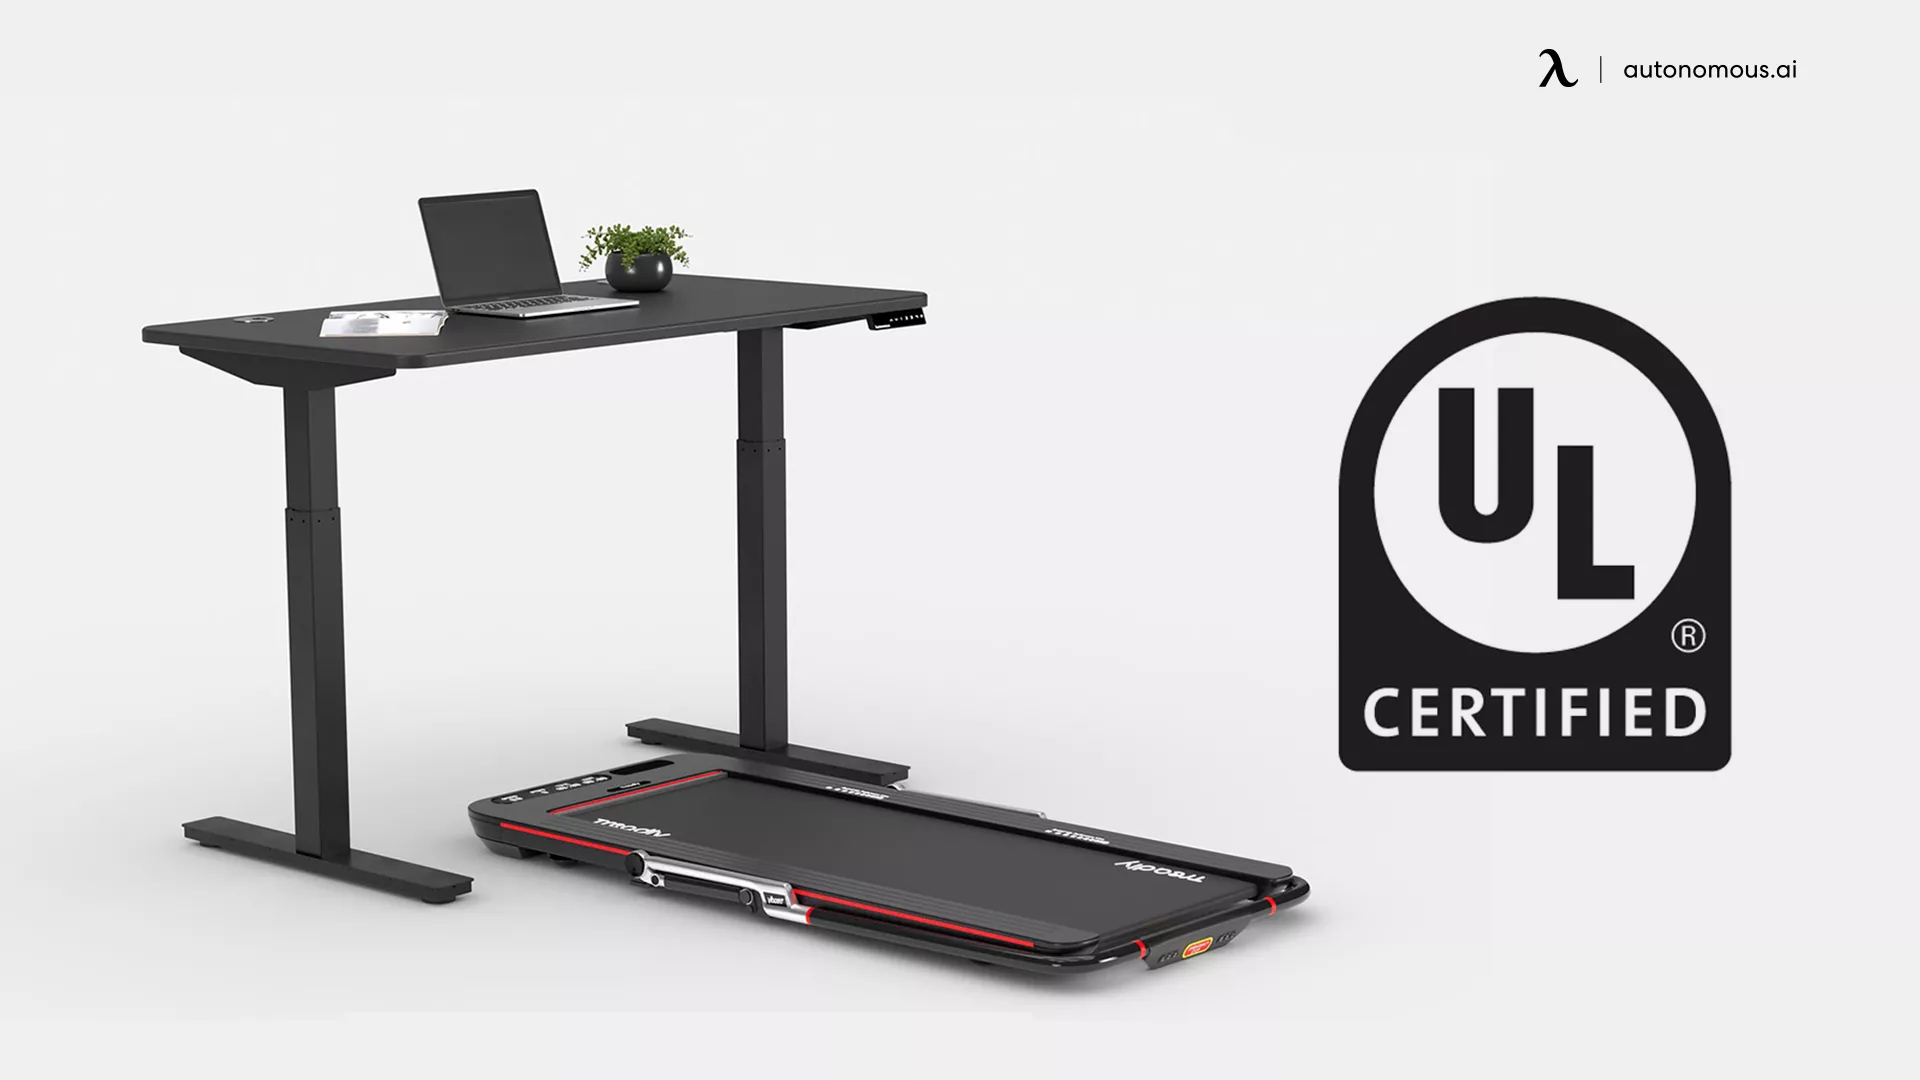 Importance of UL Certification for a Standing Desk